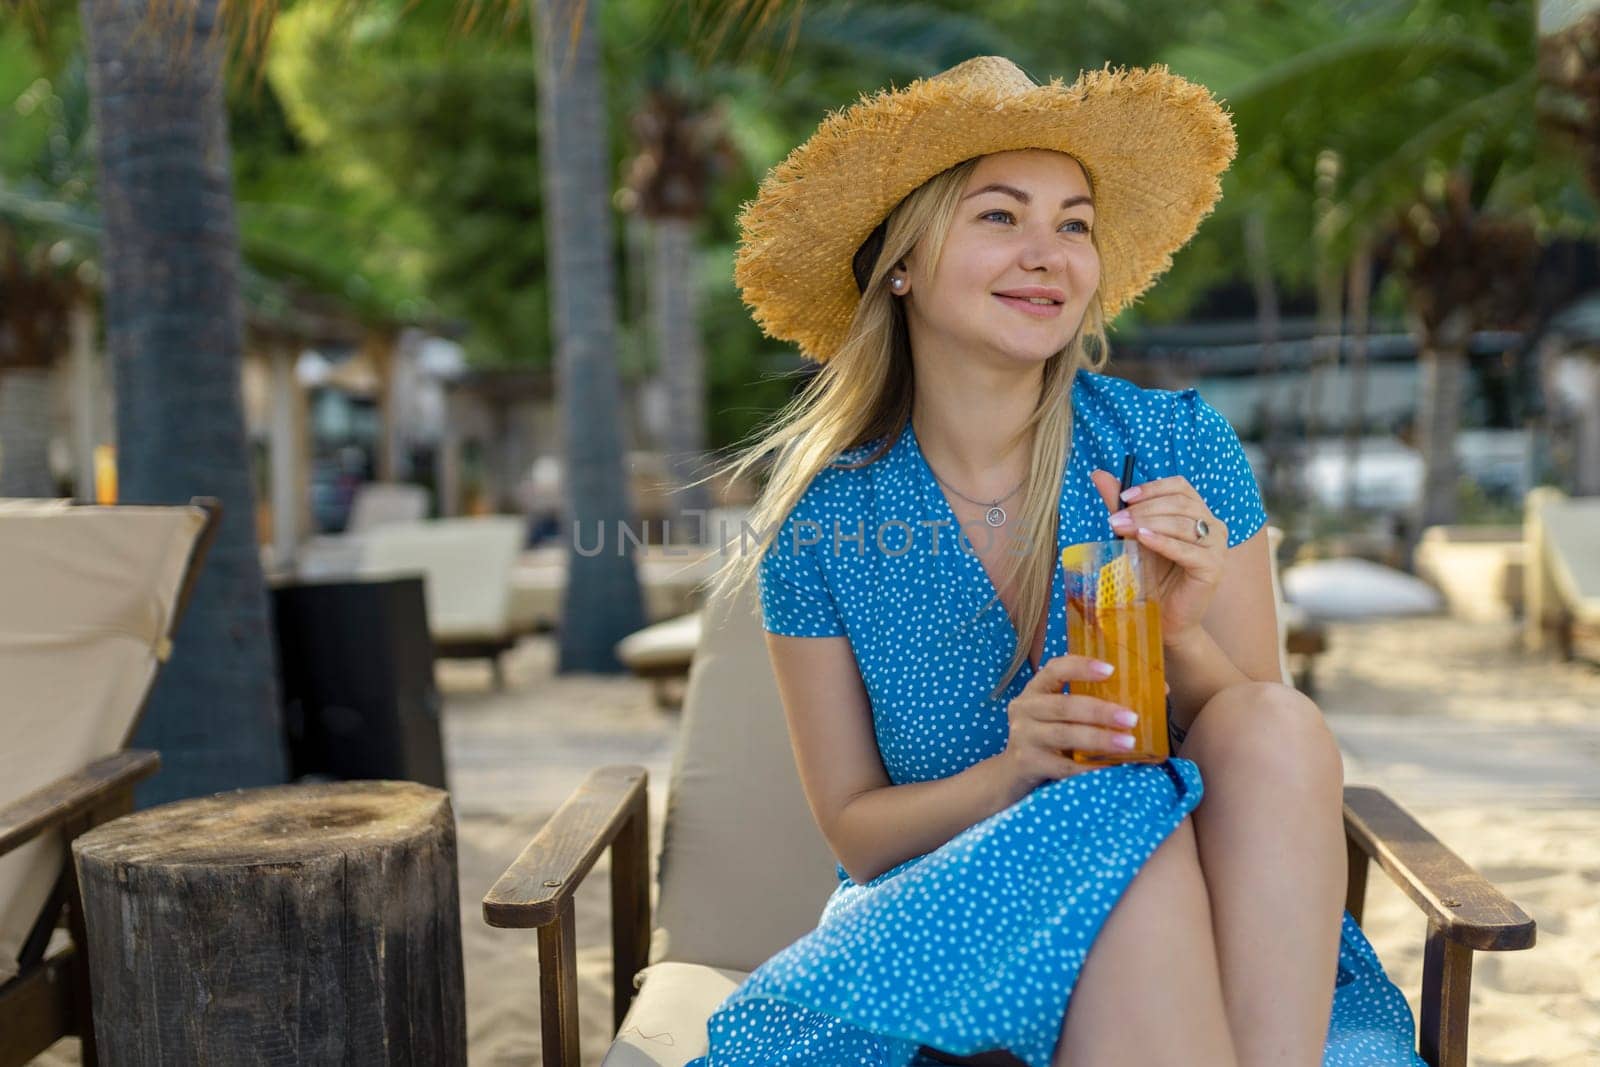 Fashion young woman drinking cocktail in beach bar. Cheerful attractive blonde woman in a dress smiles and drinks a cocktail outdoors. Happy woman enjoying summer time at the beach.